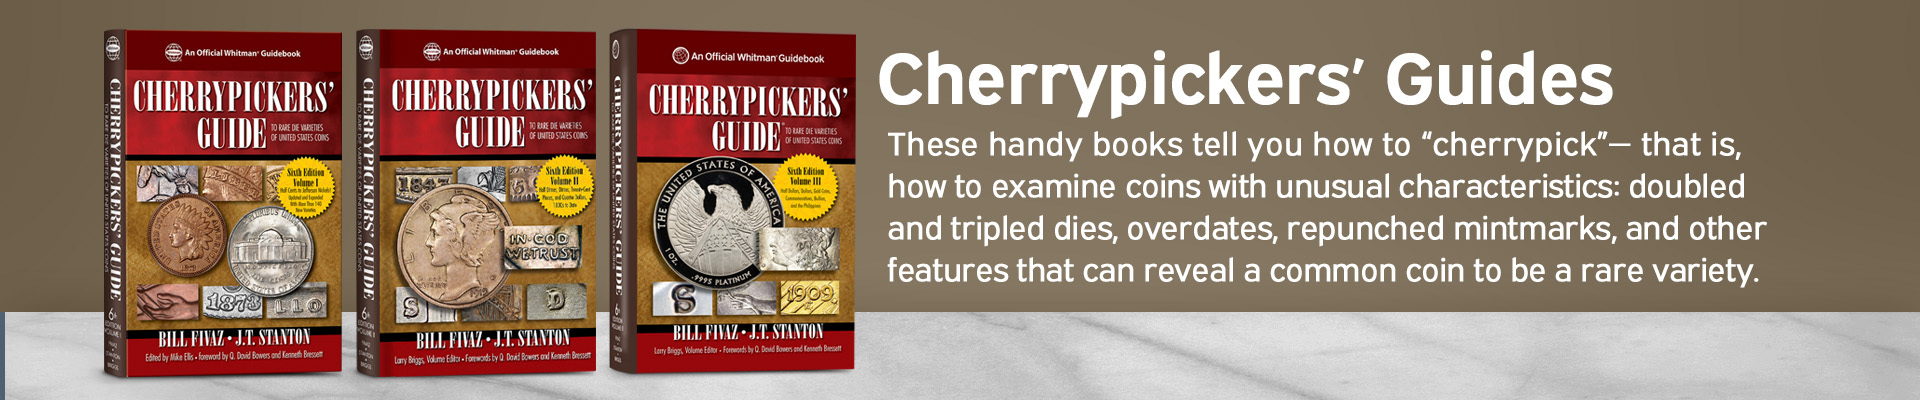 Cherrypickers' Guide